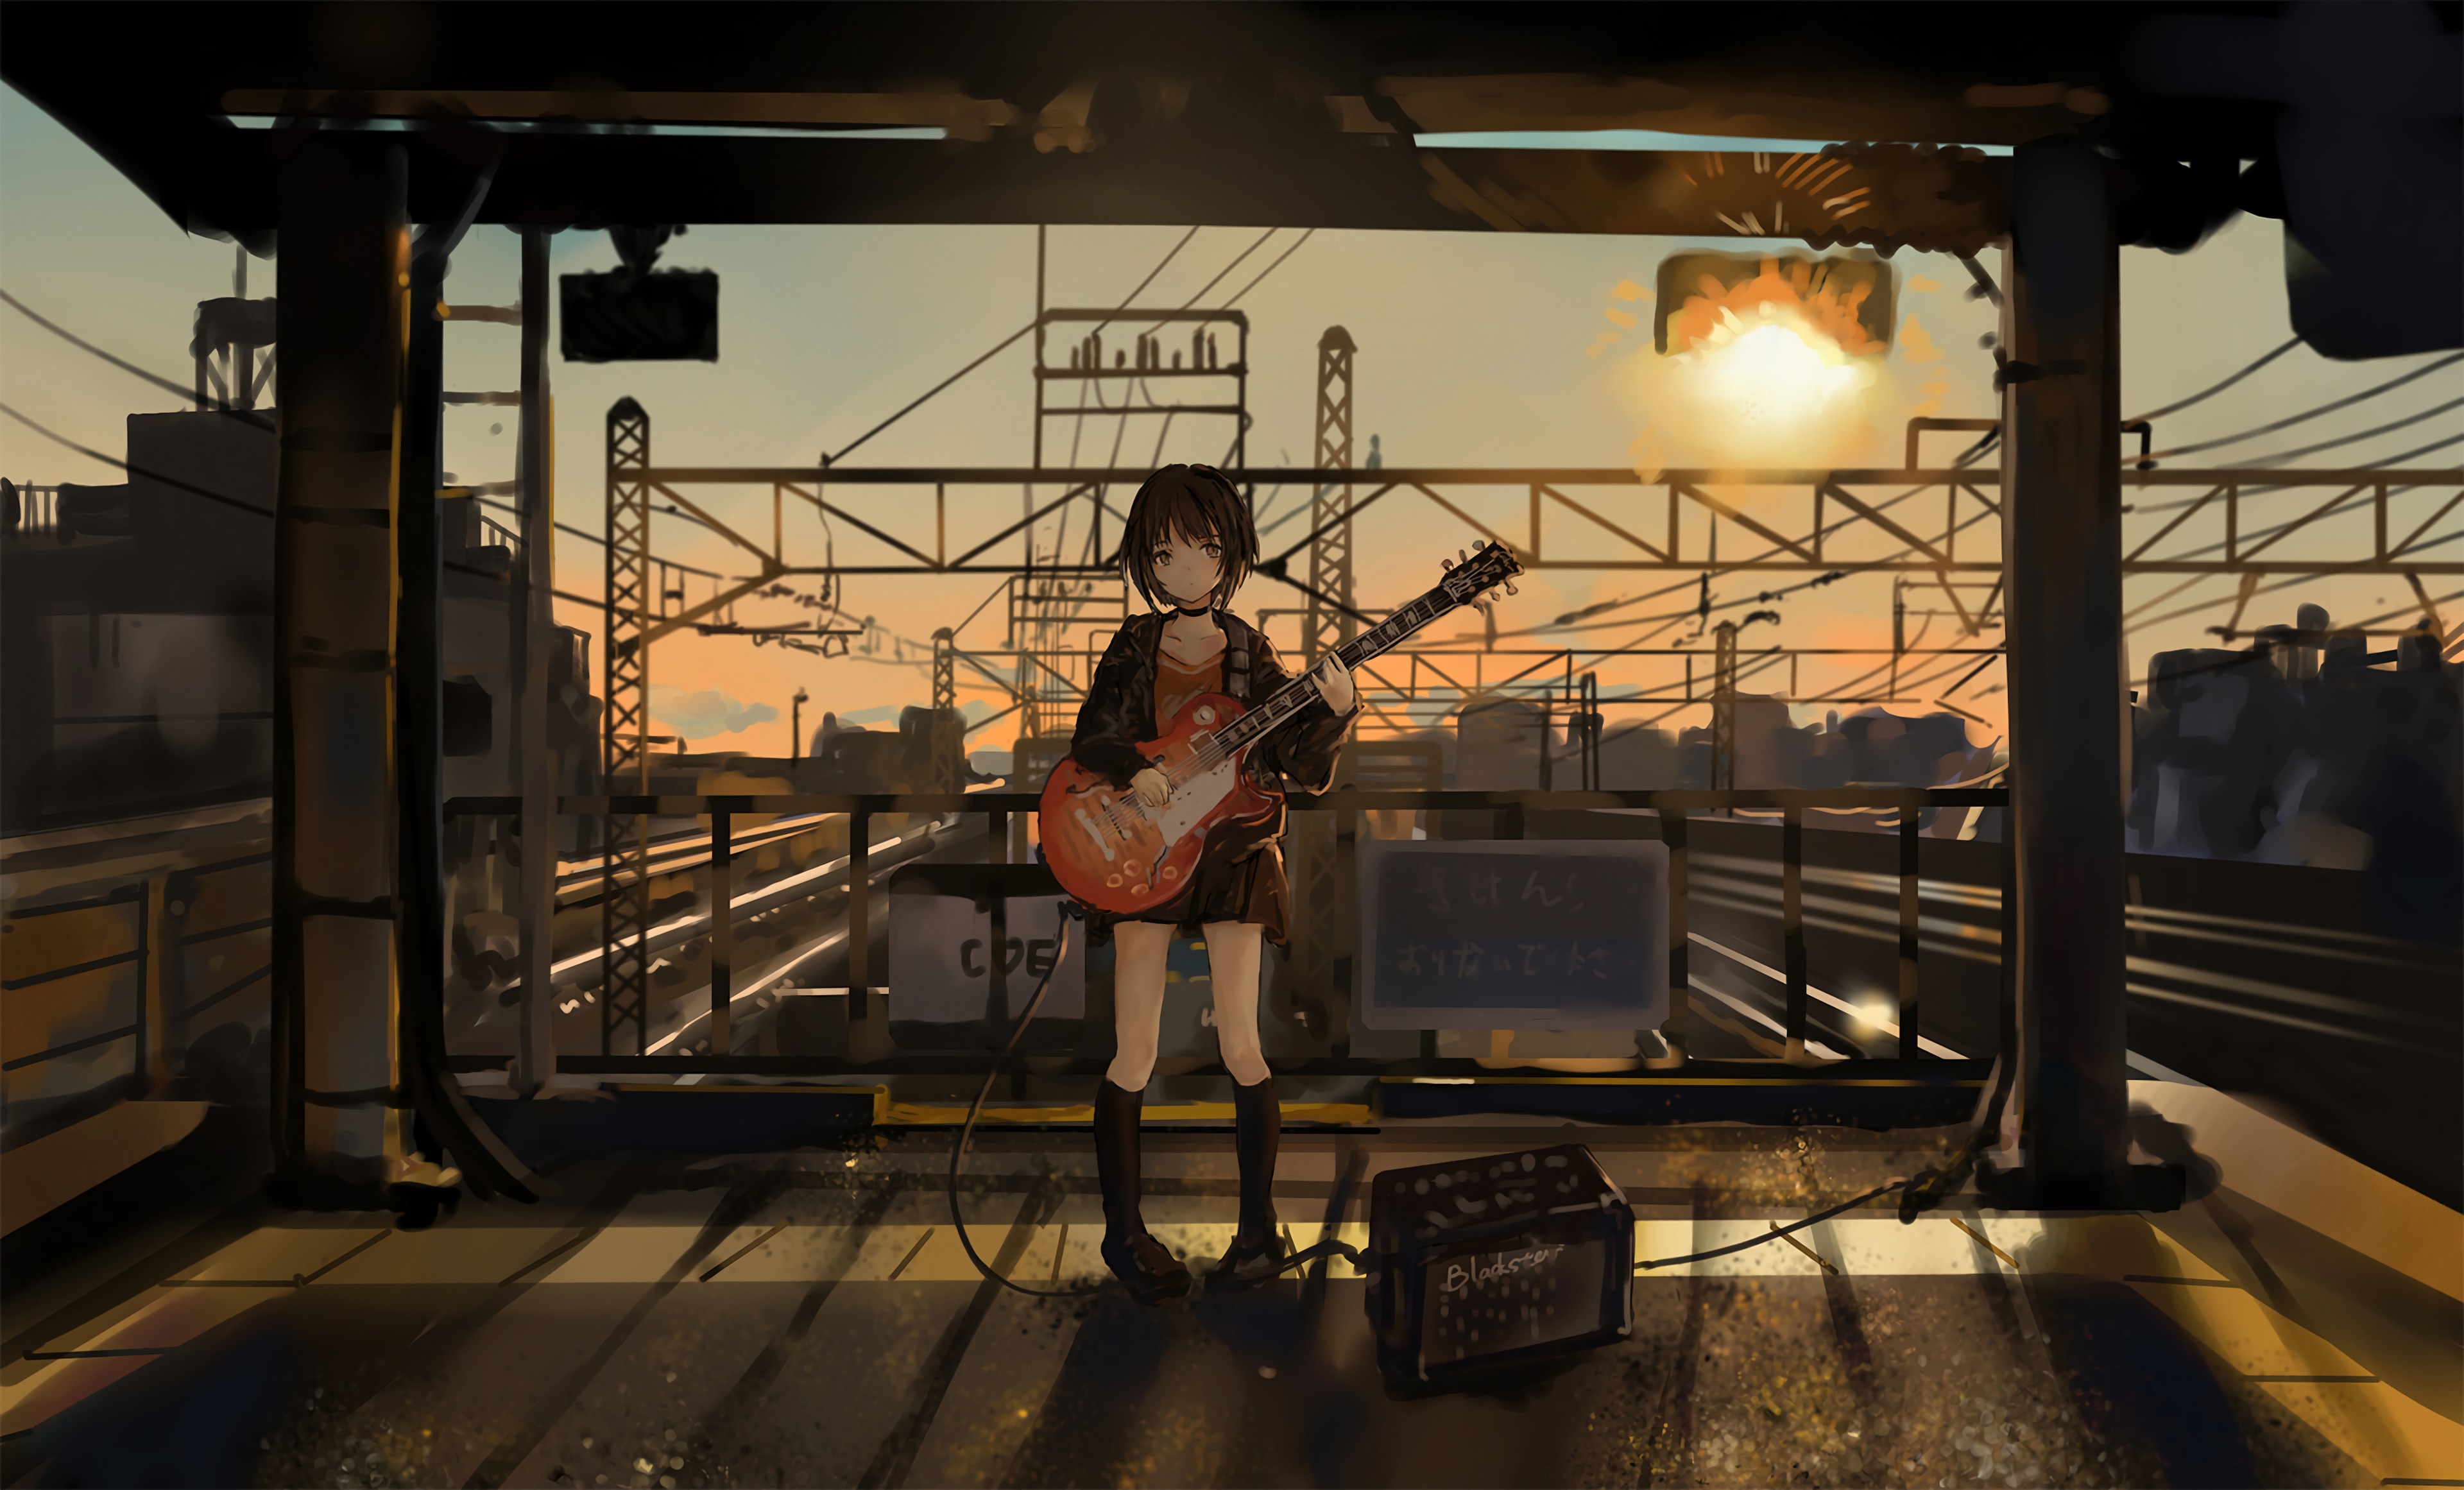 118674 Screensavers and Wallpapers Guitar for phone. Download anime, girl, art, guitar, musician, electric guitar pictures for free